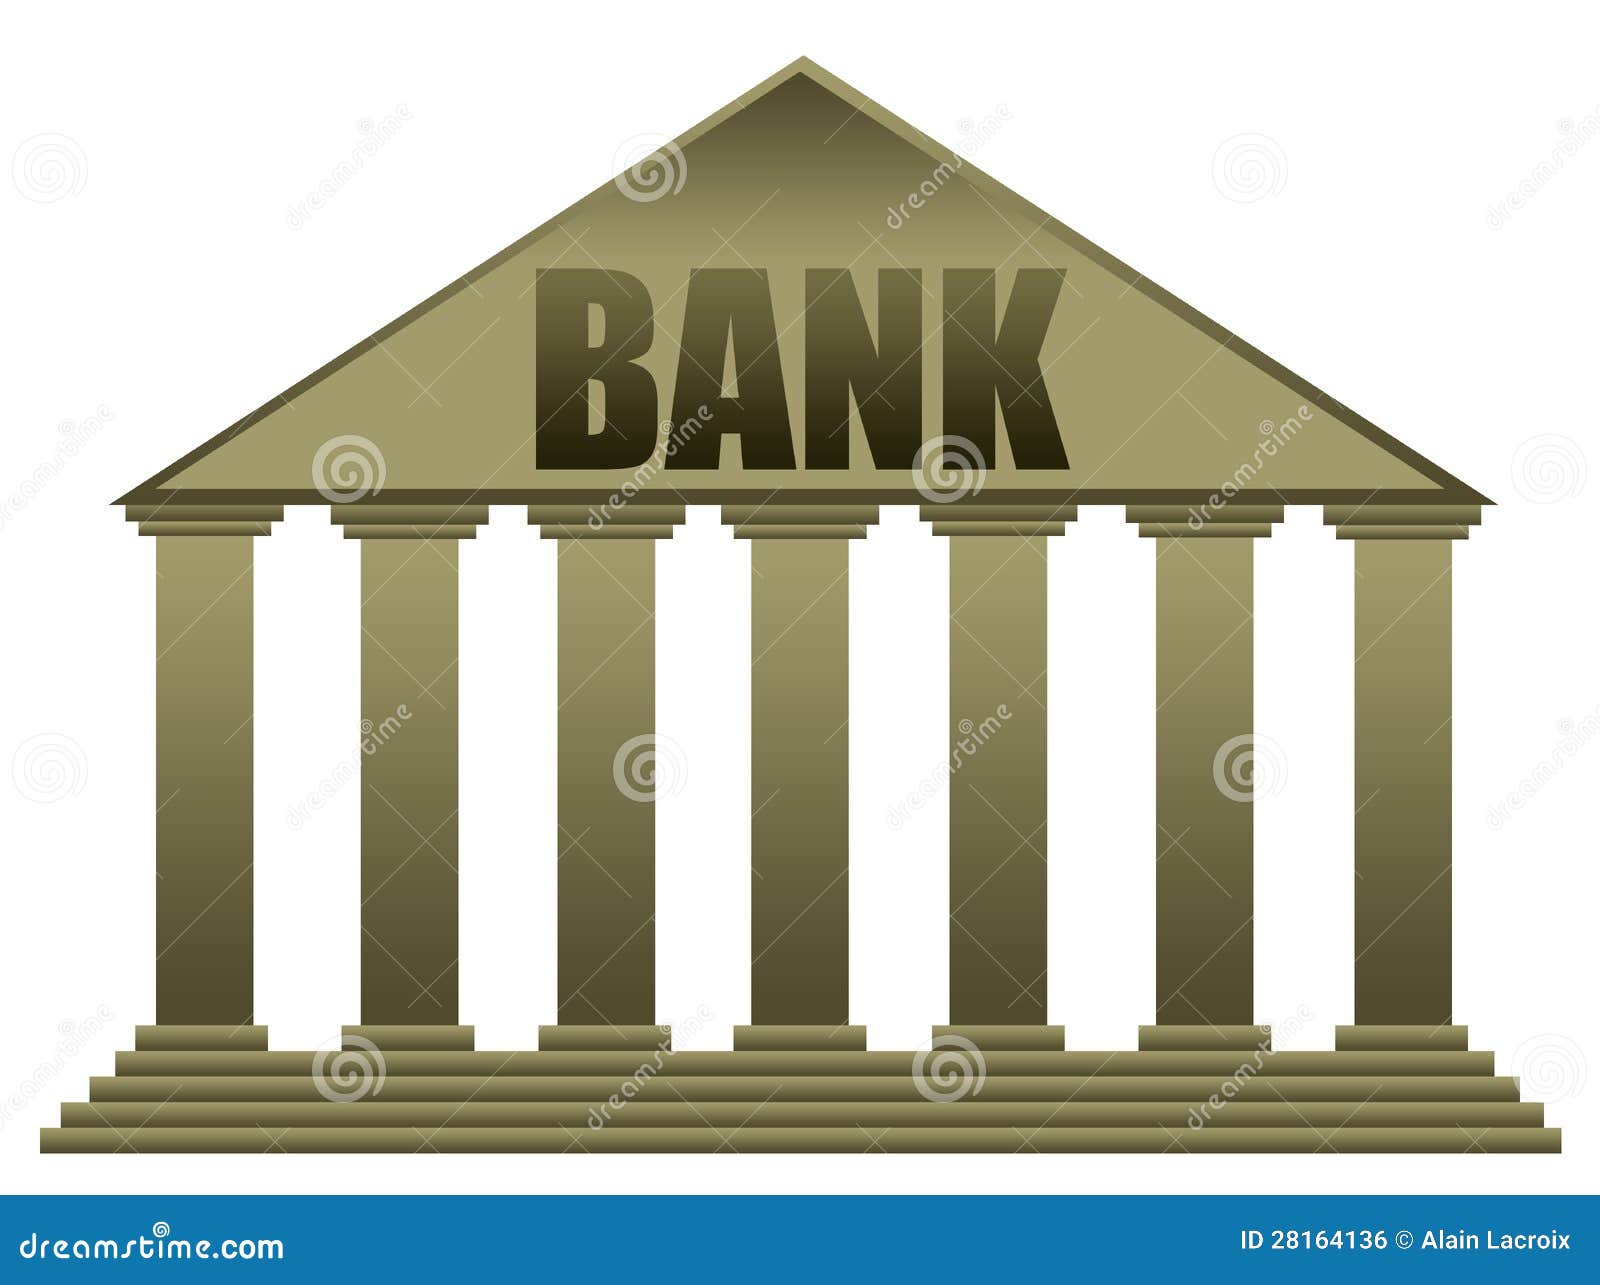 clipart of a bank building - photo #33